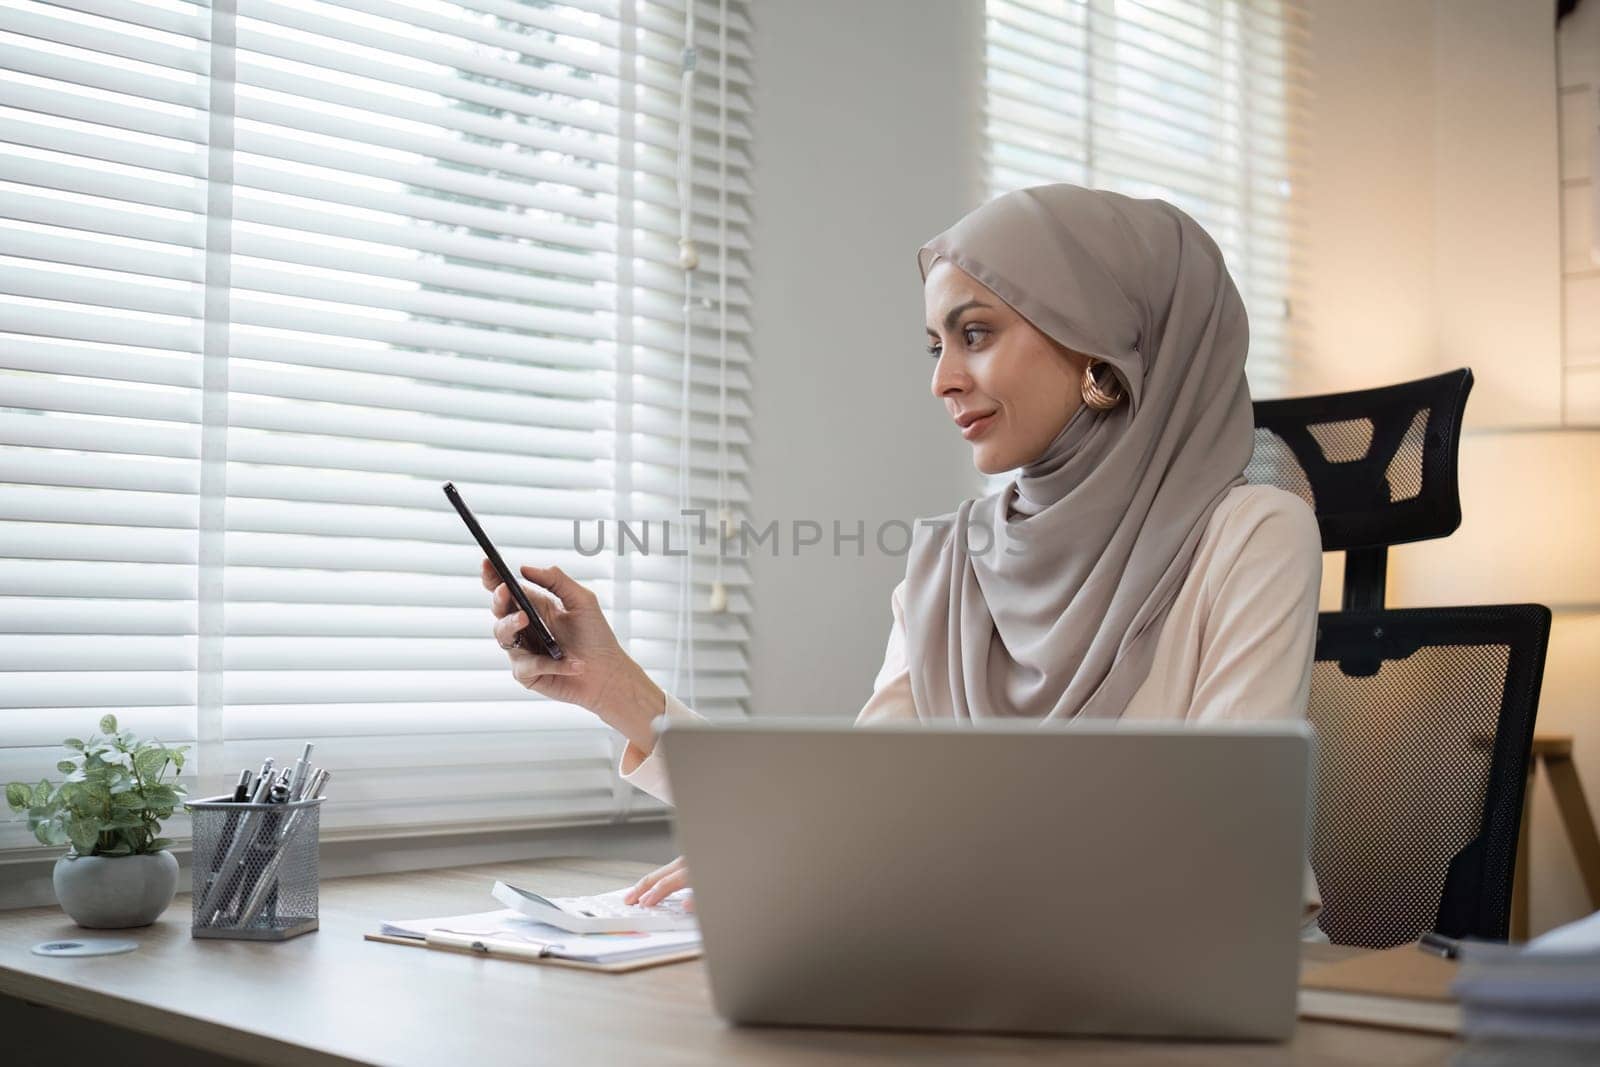 Muslim woman using smartphone at office desk. Professional workspace, casual attire.